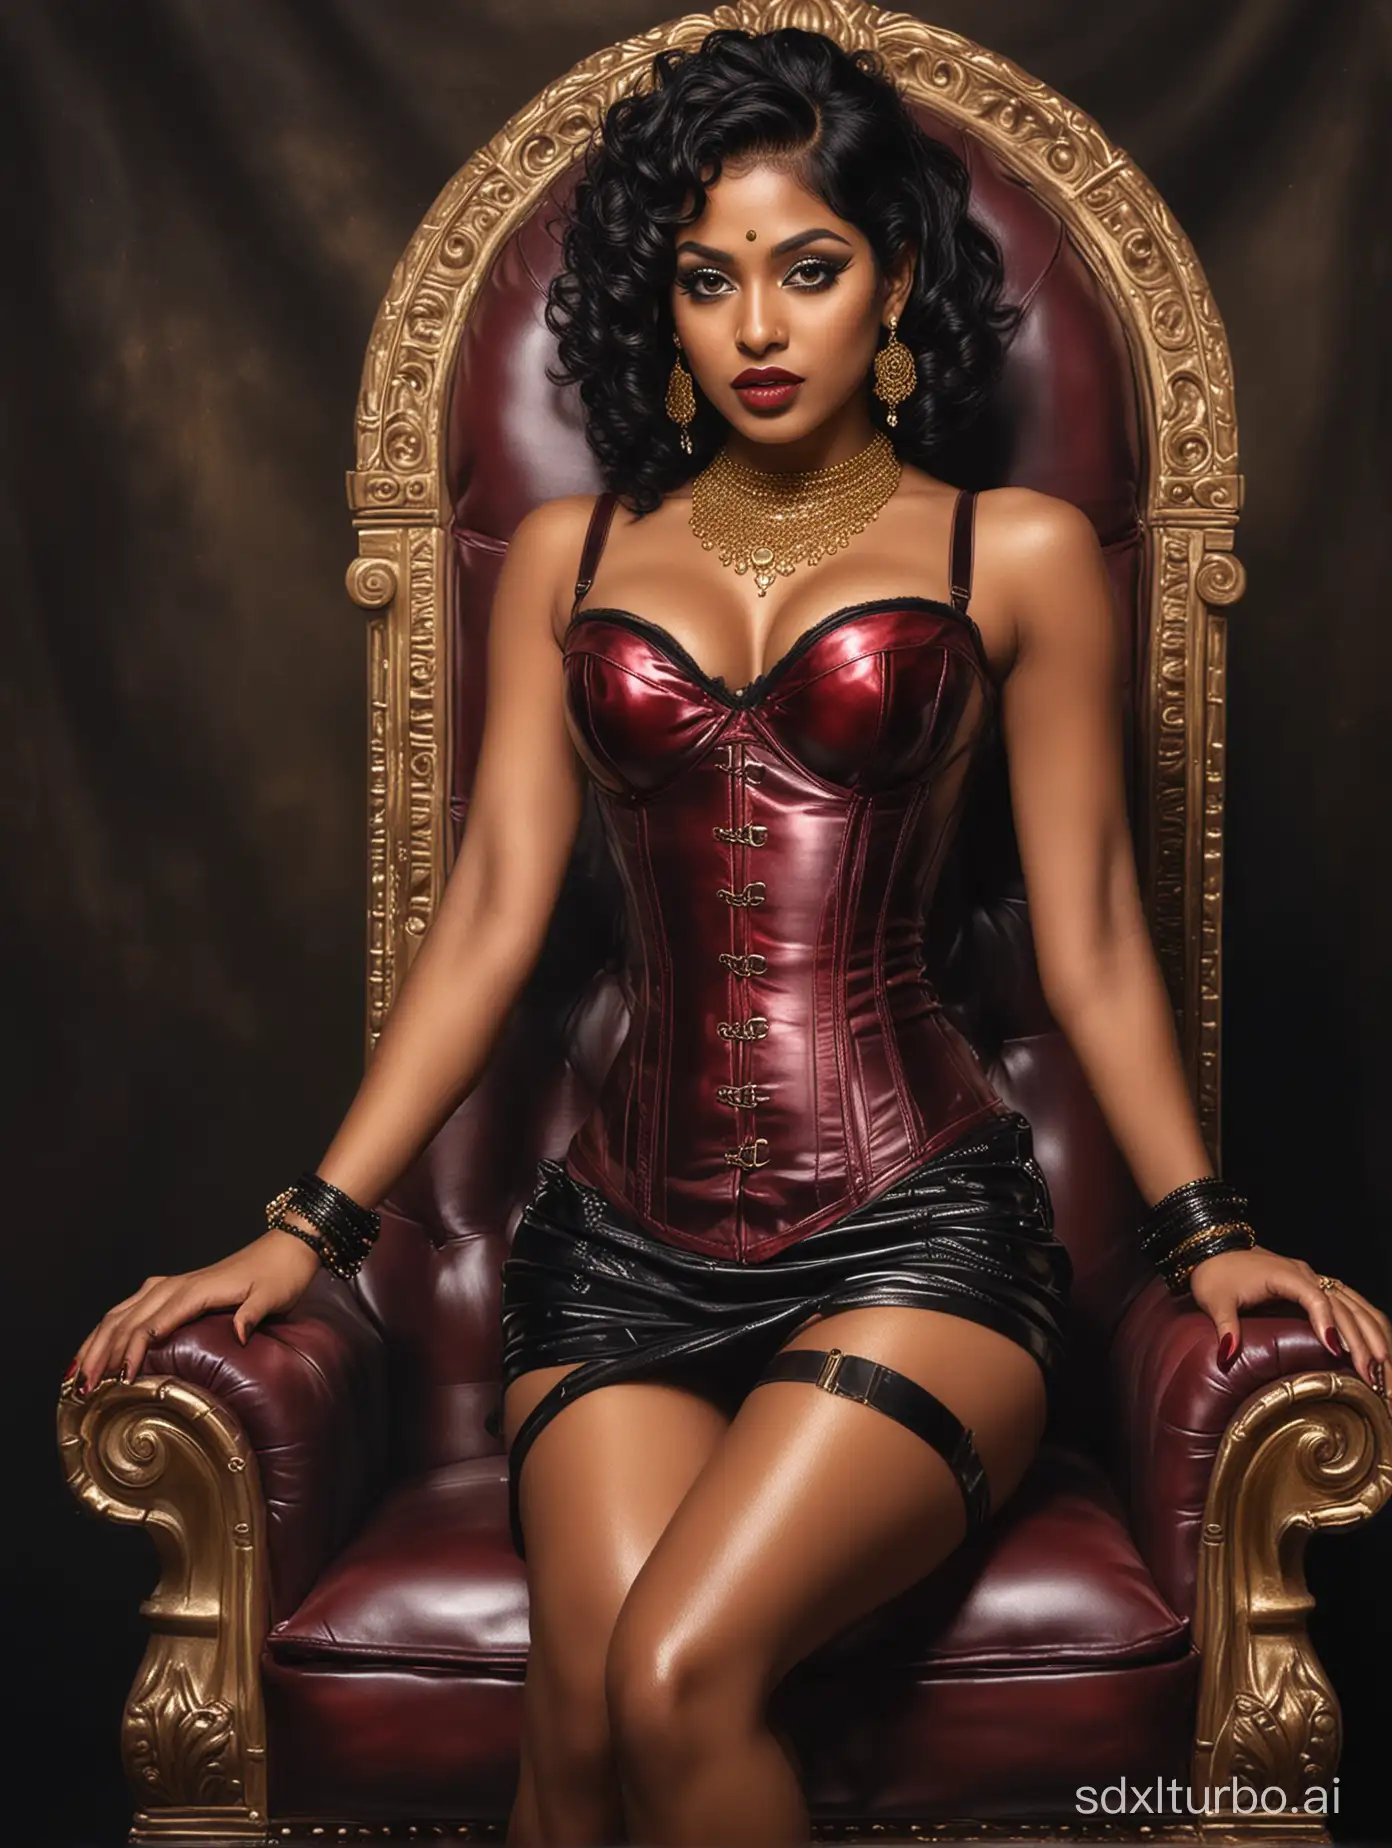 Hyper-Realistic-Oil-Painting-South-Indian-Tamil-Dommy-Mistress-in-Leather-Corset-Throne-Portrait